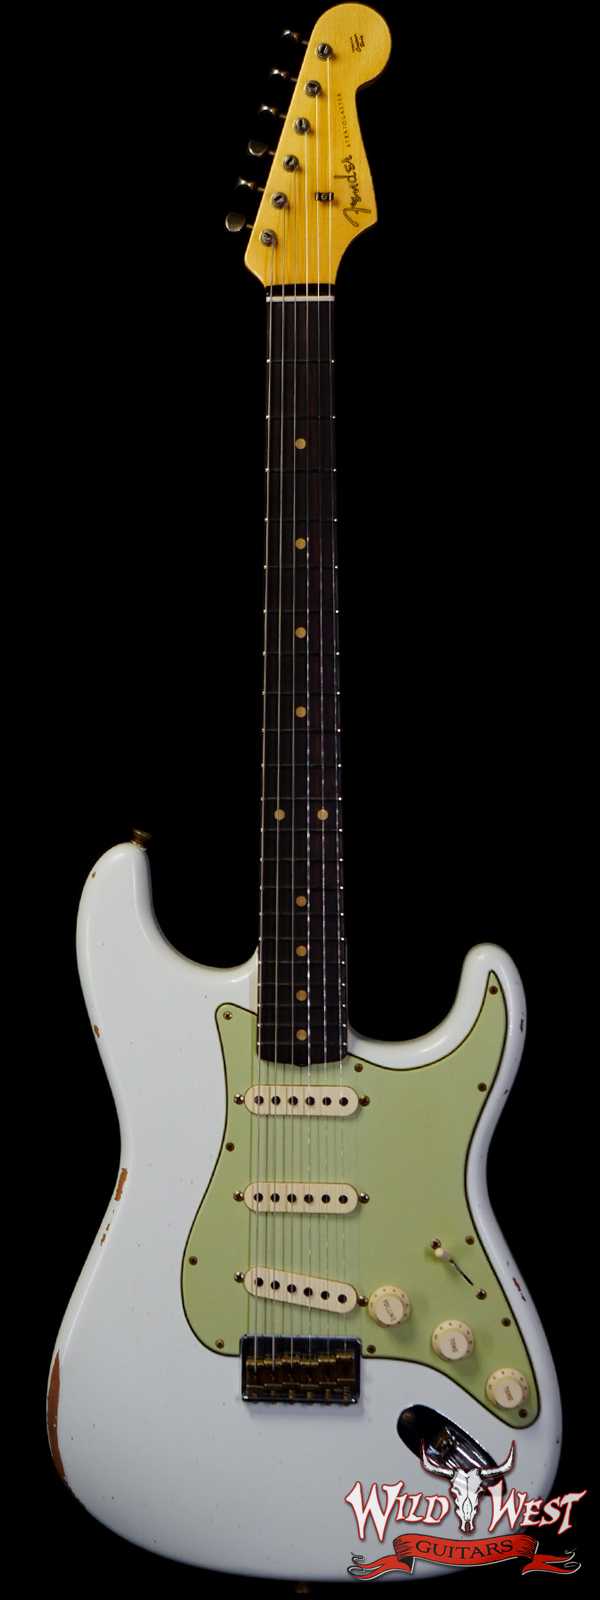 Fender Custom Shop 1962 Stratocaster Hardtail Hand-Wound Pickups AAA Dark Rosewood Slab Board Relic Olympic White 6.90 LBS